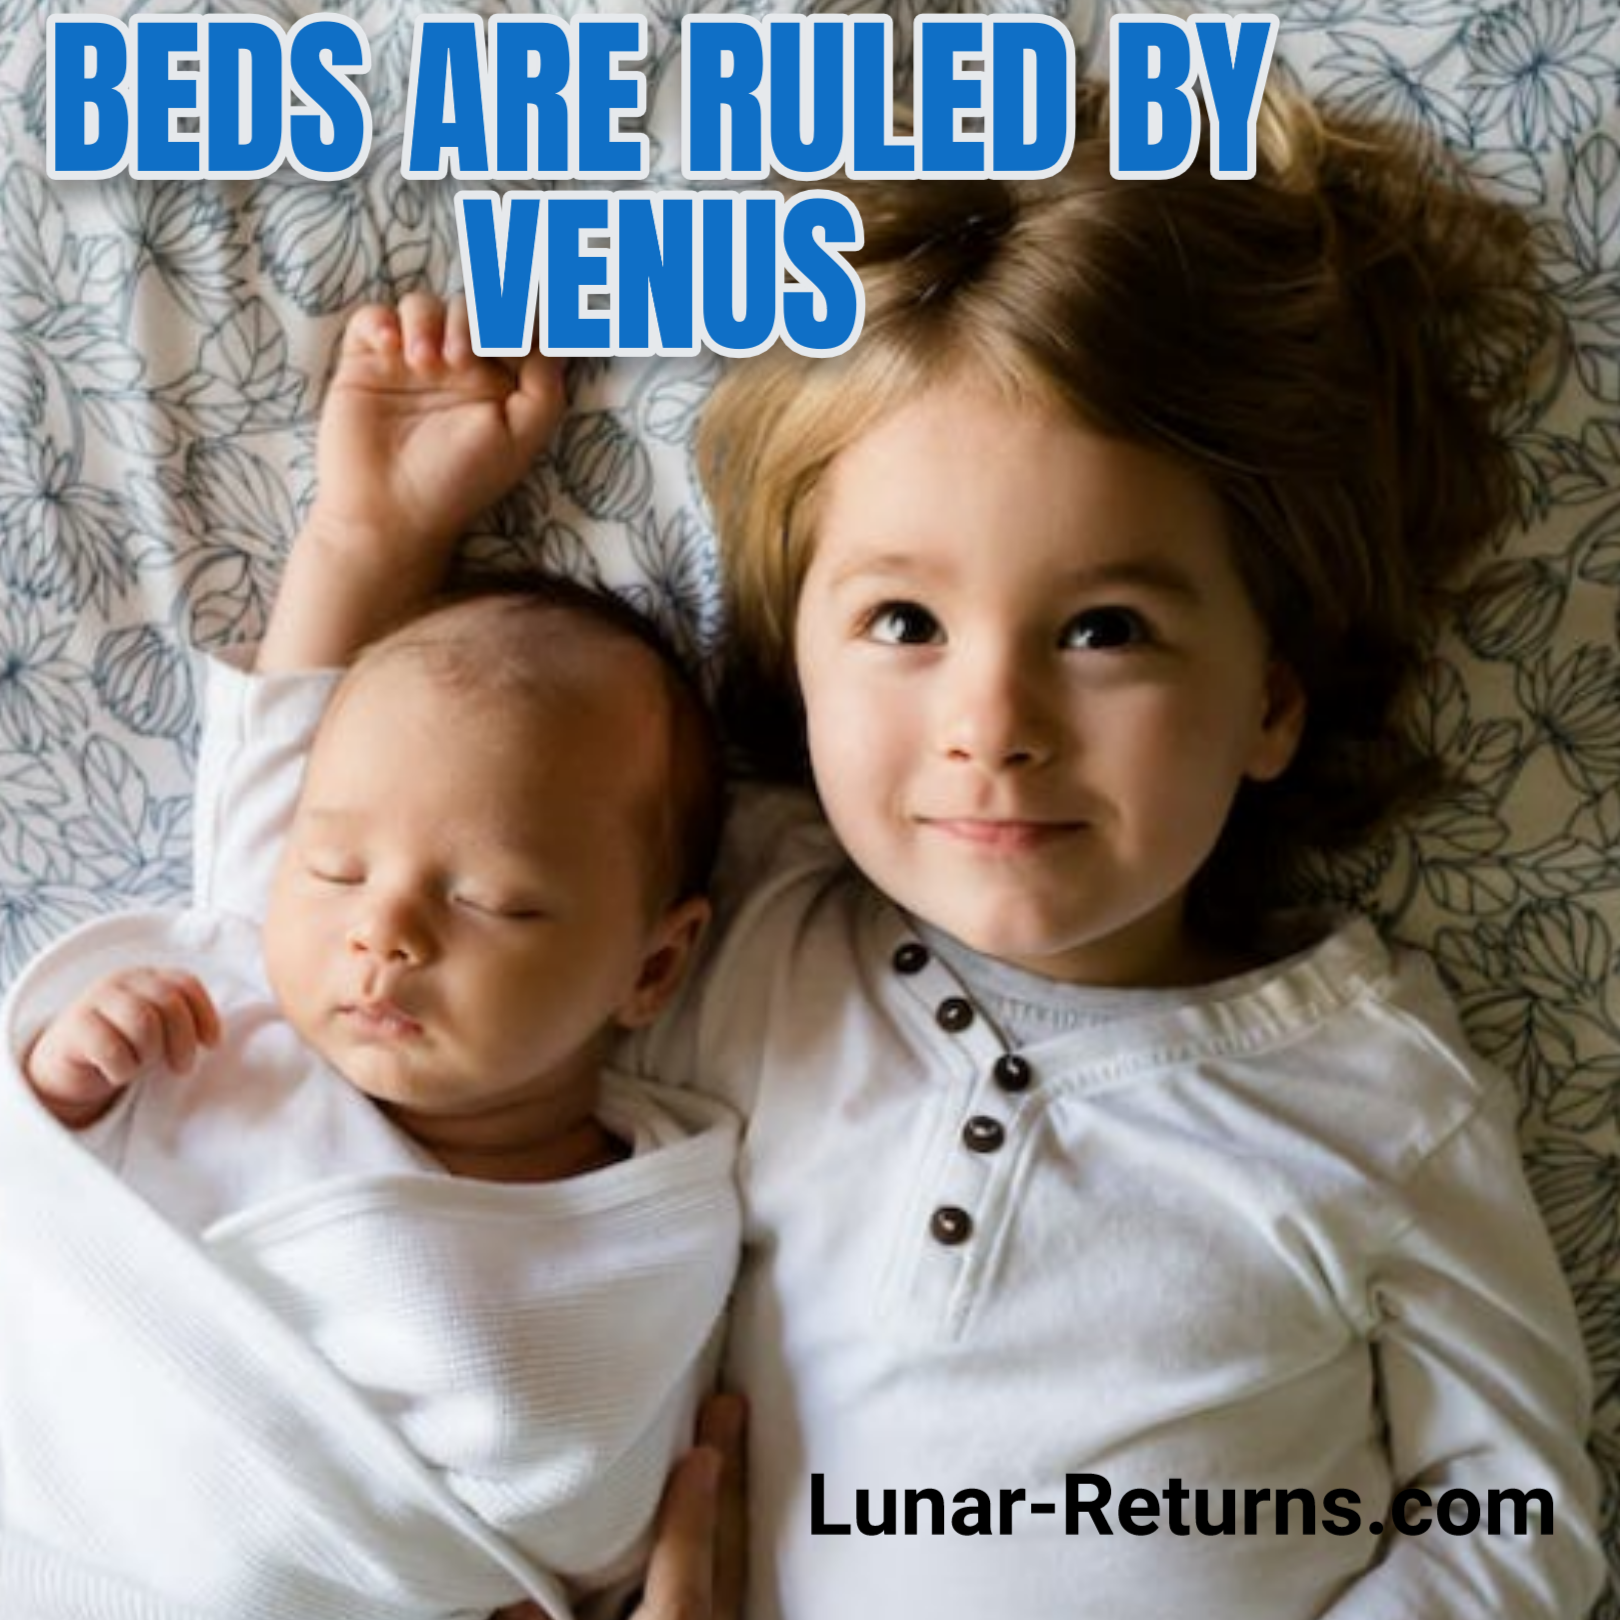 beds are ruled by venus